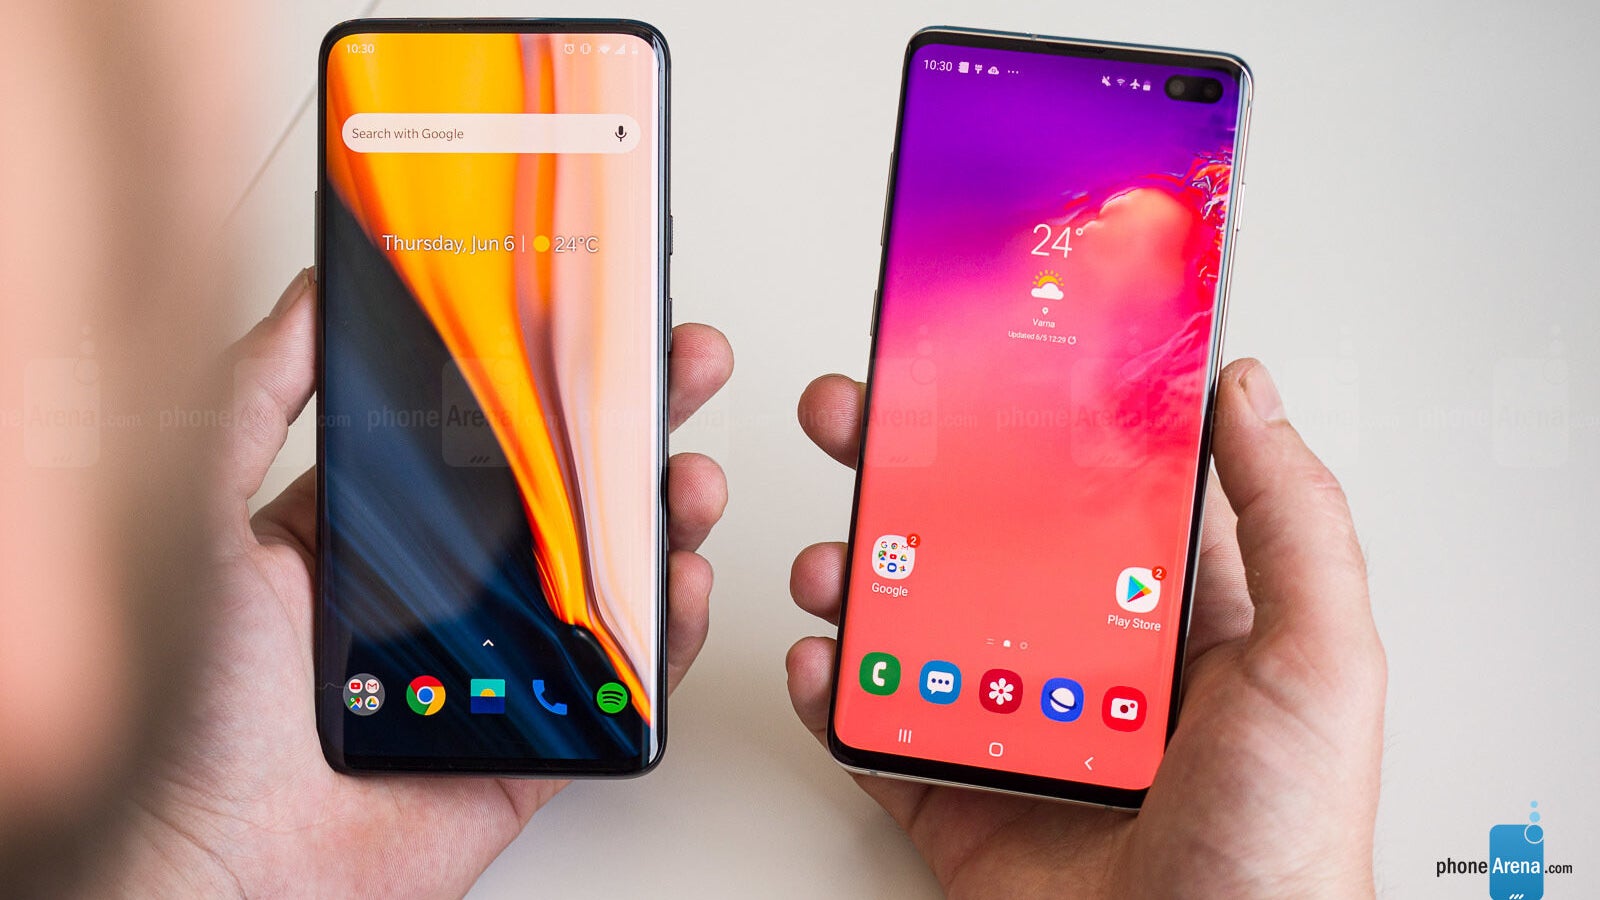 The OnePlus 7 Pro was unrivalled when it came to smoothness. - No 120Hz display for iPhone 14: But Apple has a secret for smooth performance (that Android doesn’t)